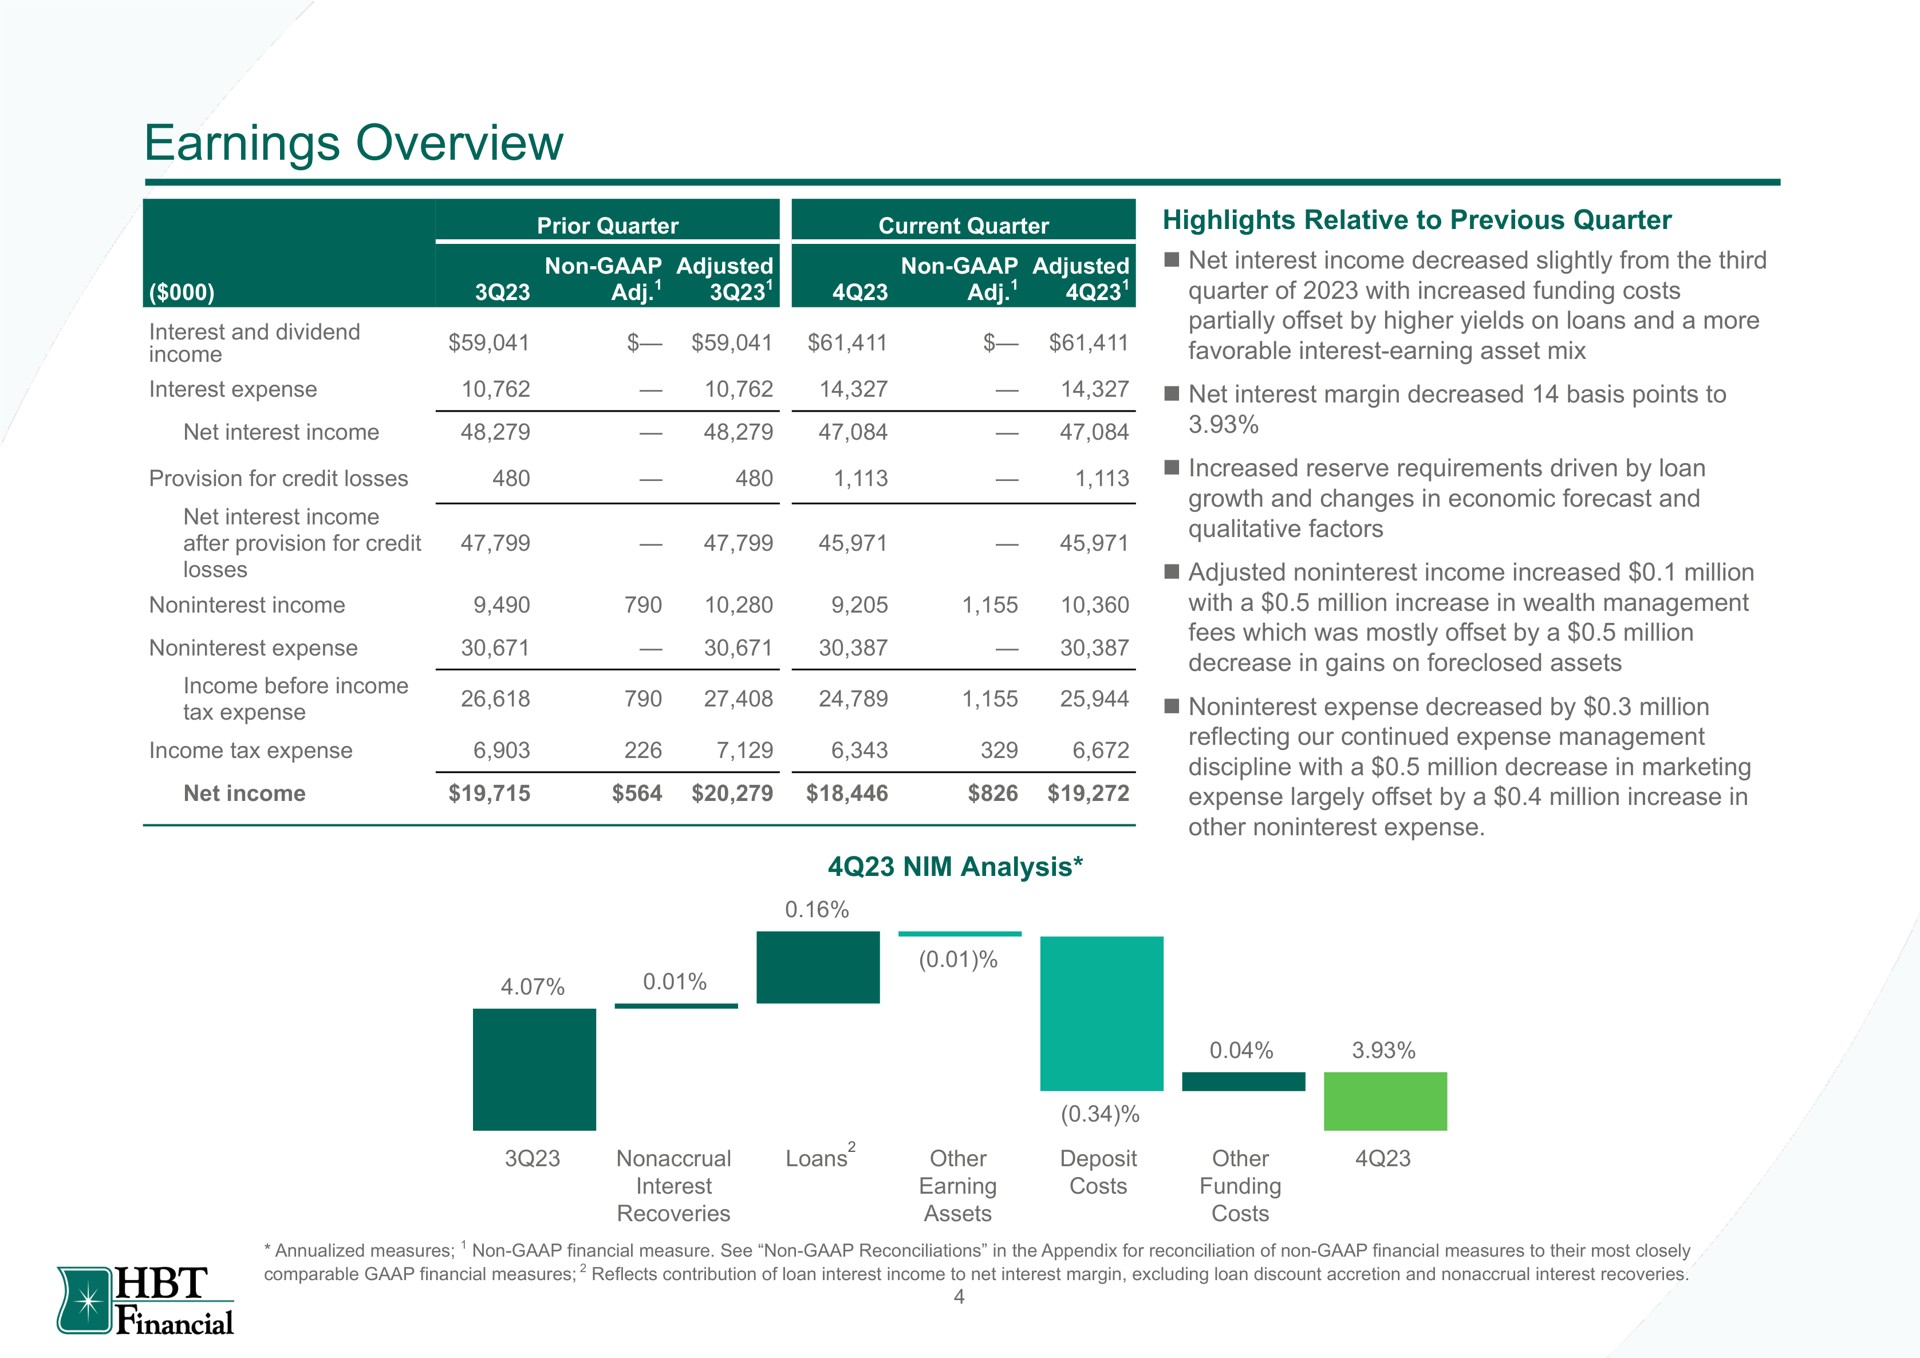 earnings overview sat sant a net interest income provision for credit losses expense nerves on anda requirements by which was mostly offset by a million expense decreased by million financial | HBT Financial